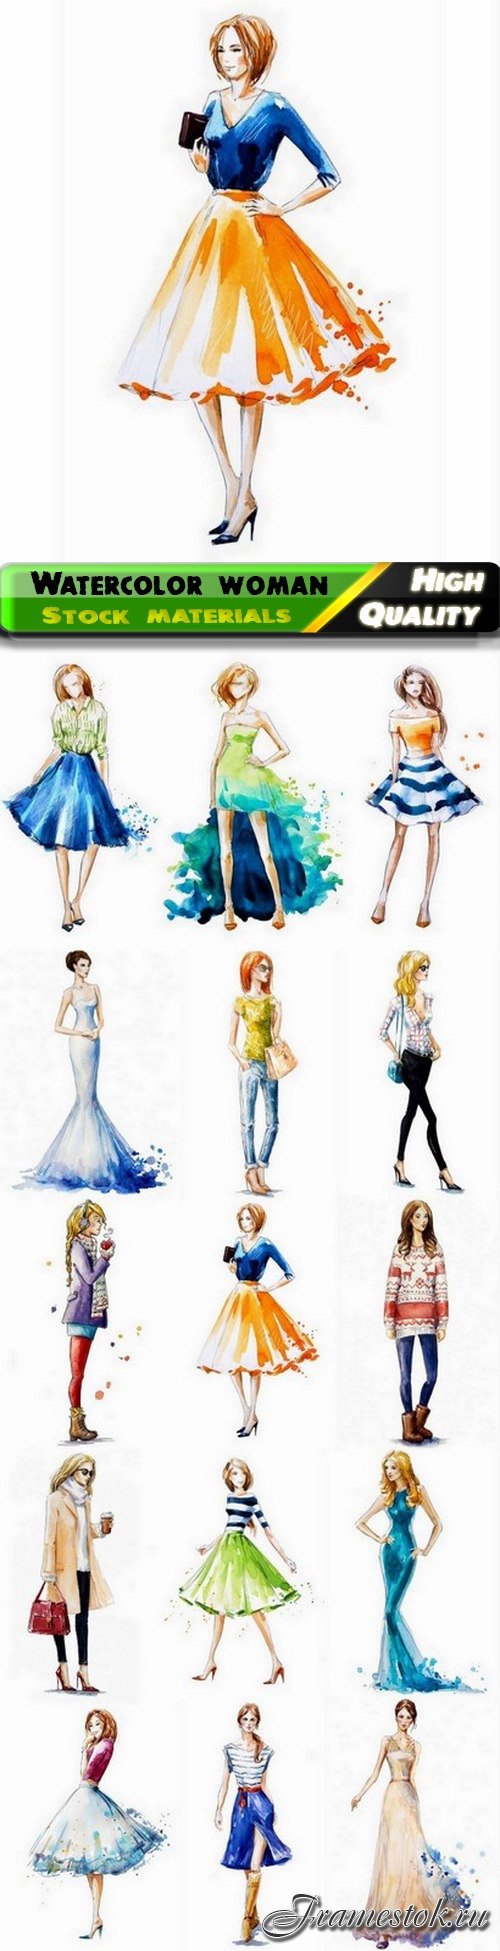 Watercolor sketch fashionable woman and stylish girl picture - 15 HQ Jpg